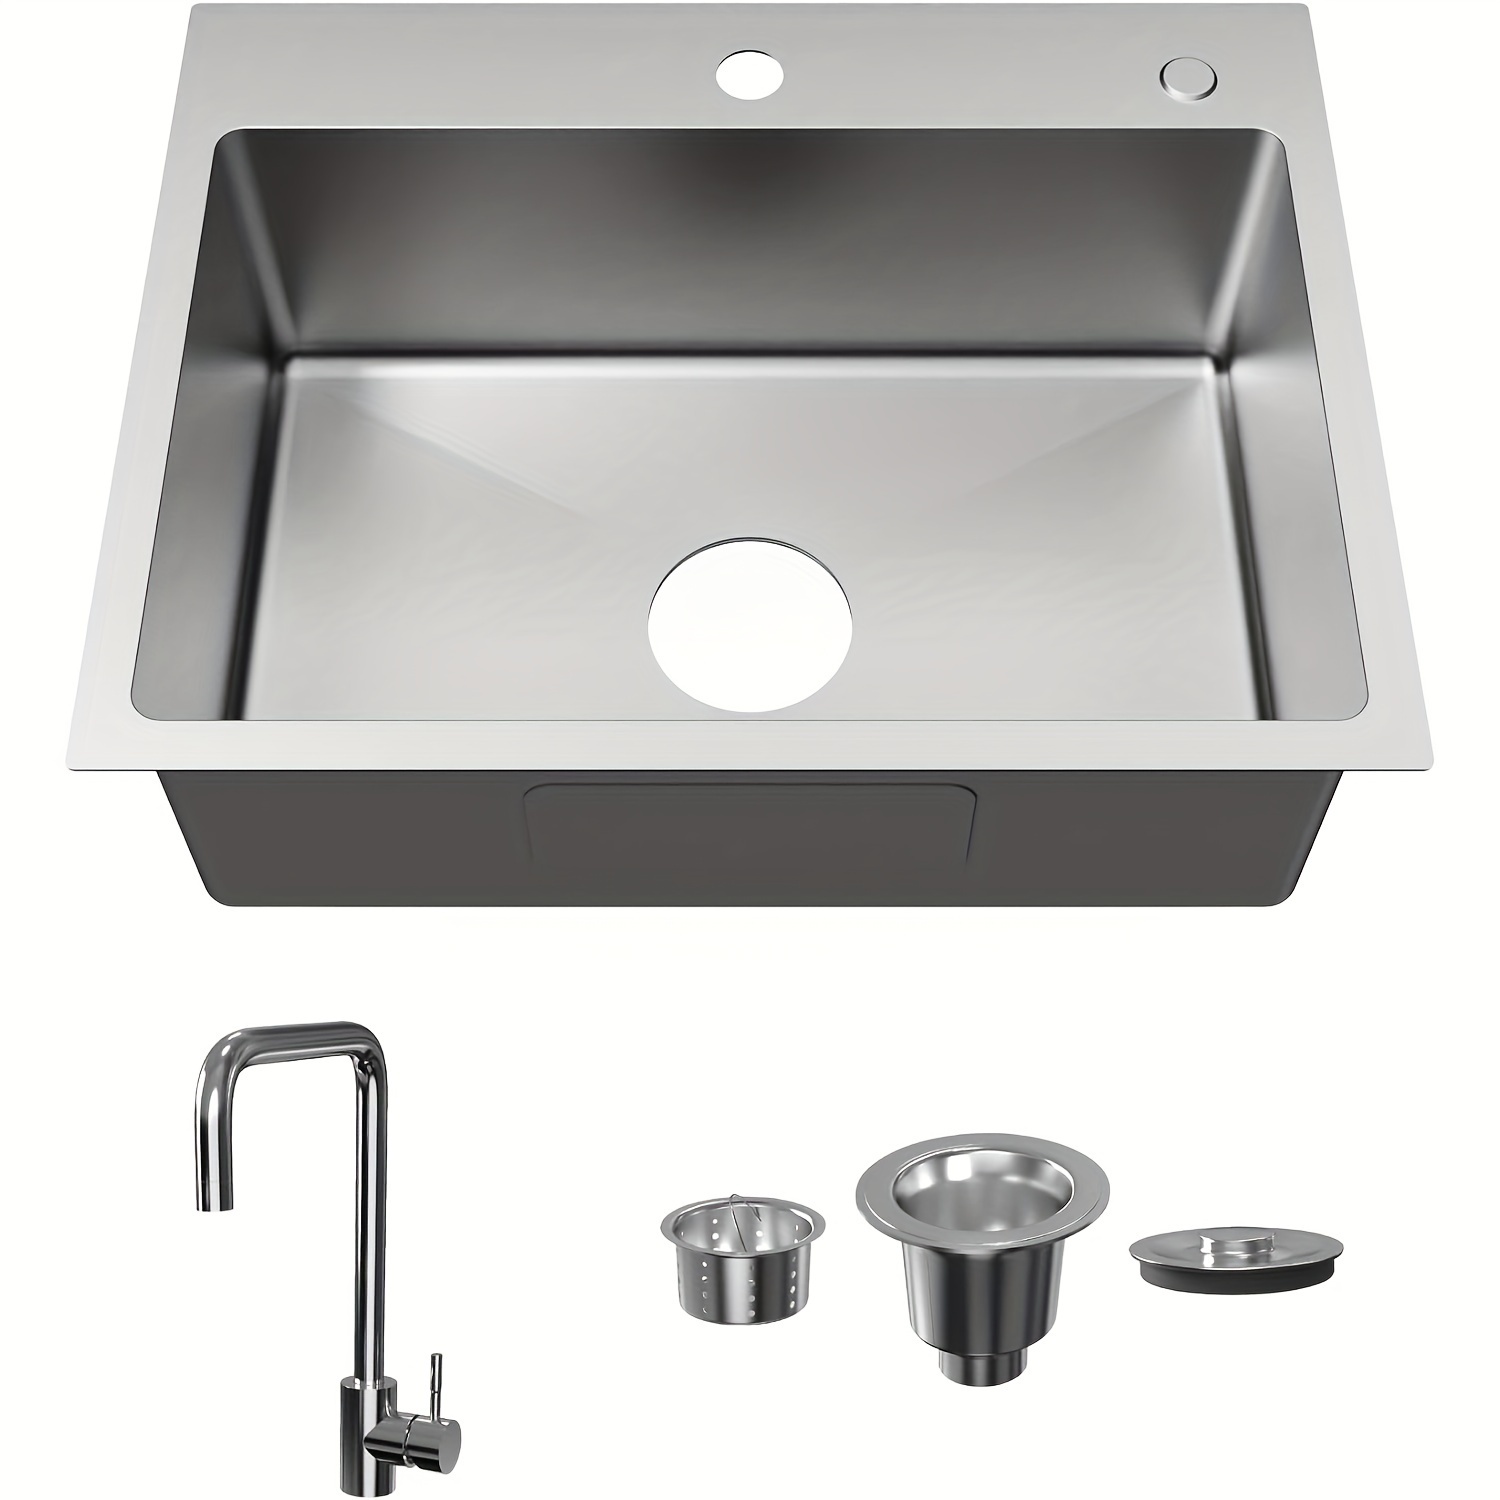 

24" X 18" Drop In Kitchen Sink Stainless Steel Single Bowl Kitchen Sink With Drain Kit And Faucet